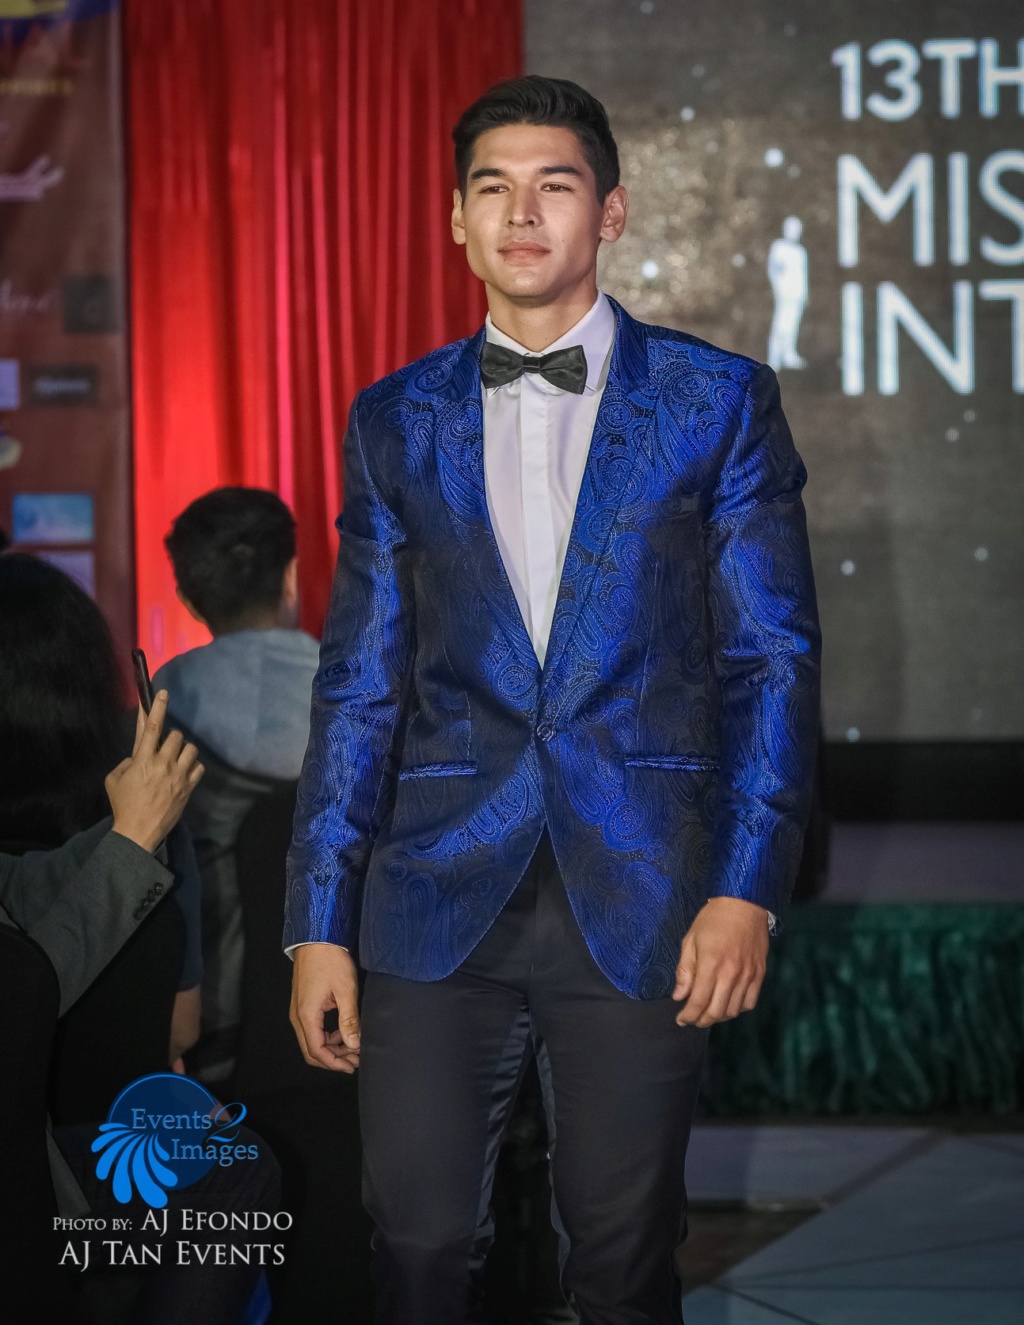 The 13th Mister International in Manila, Philippines on February 24,2019 - Page 10 52445412